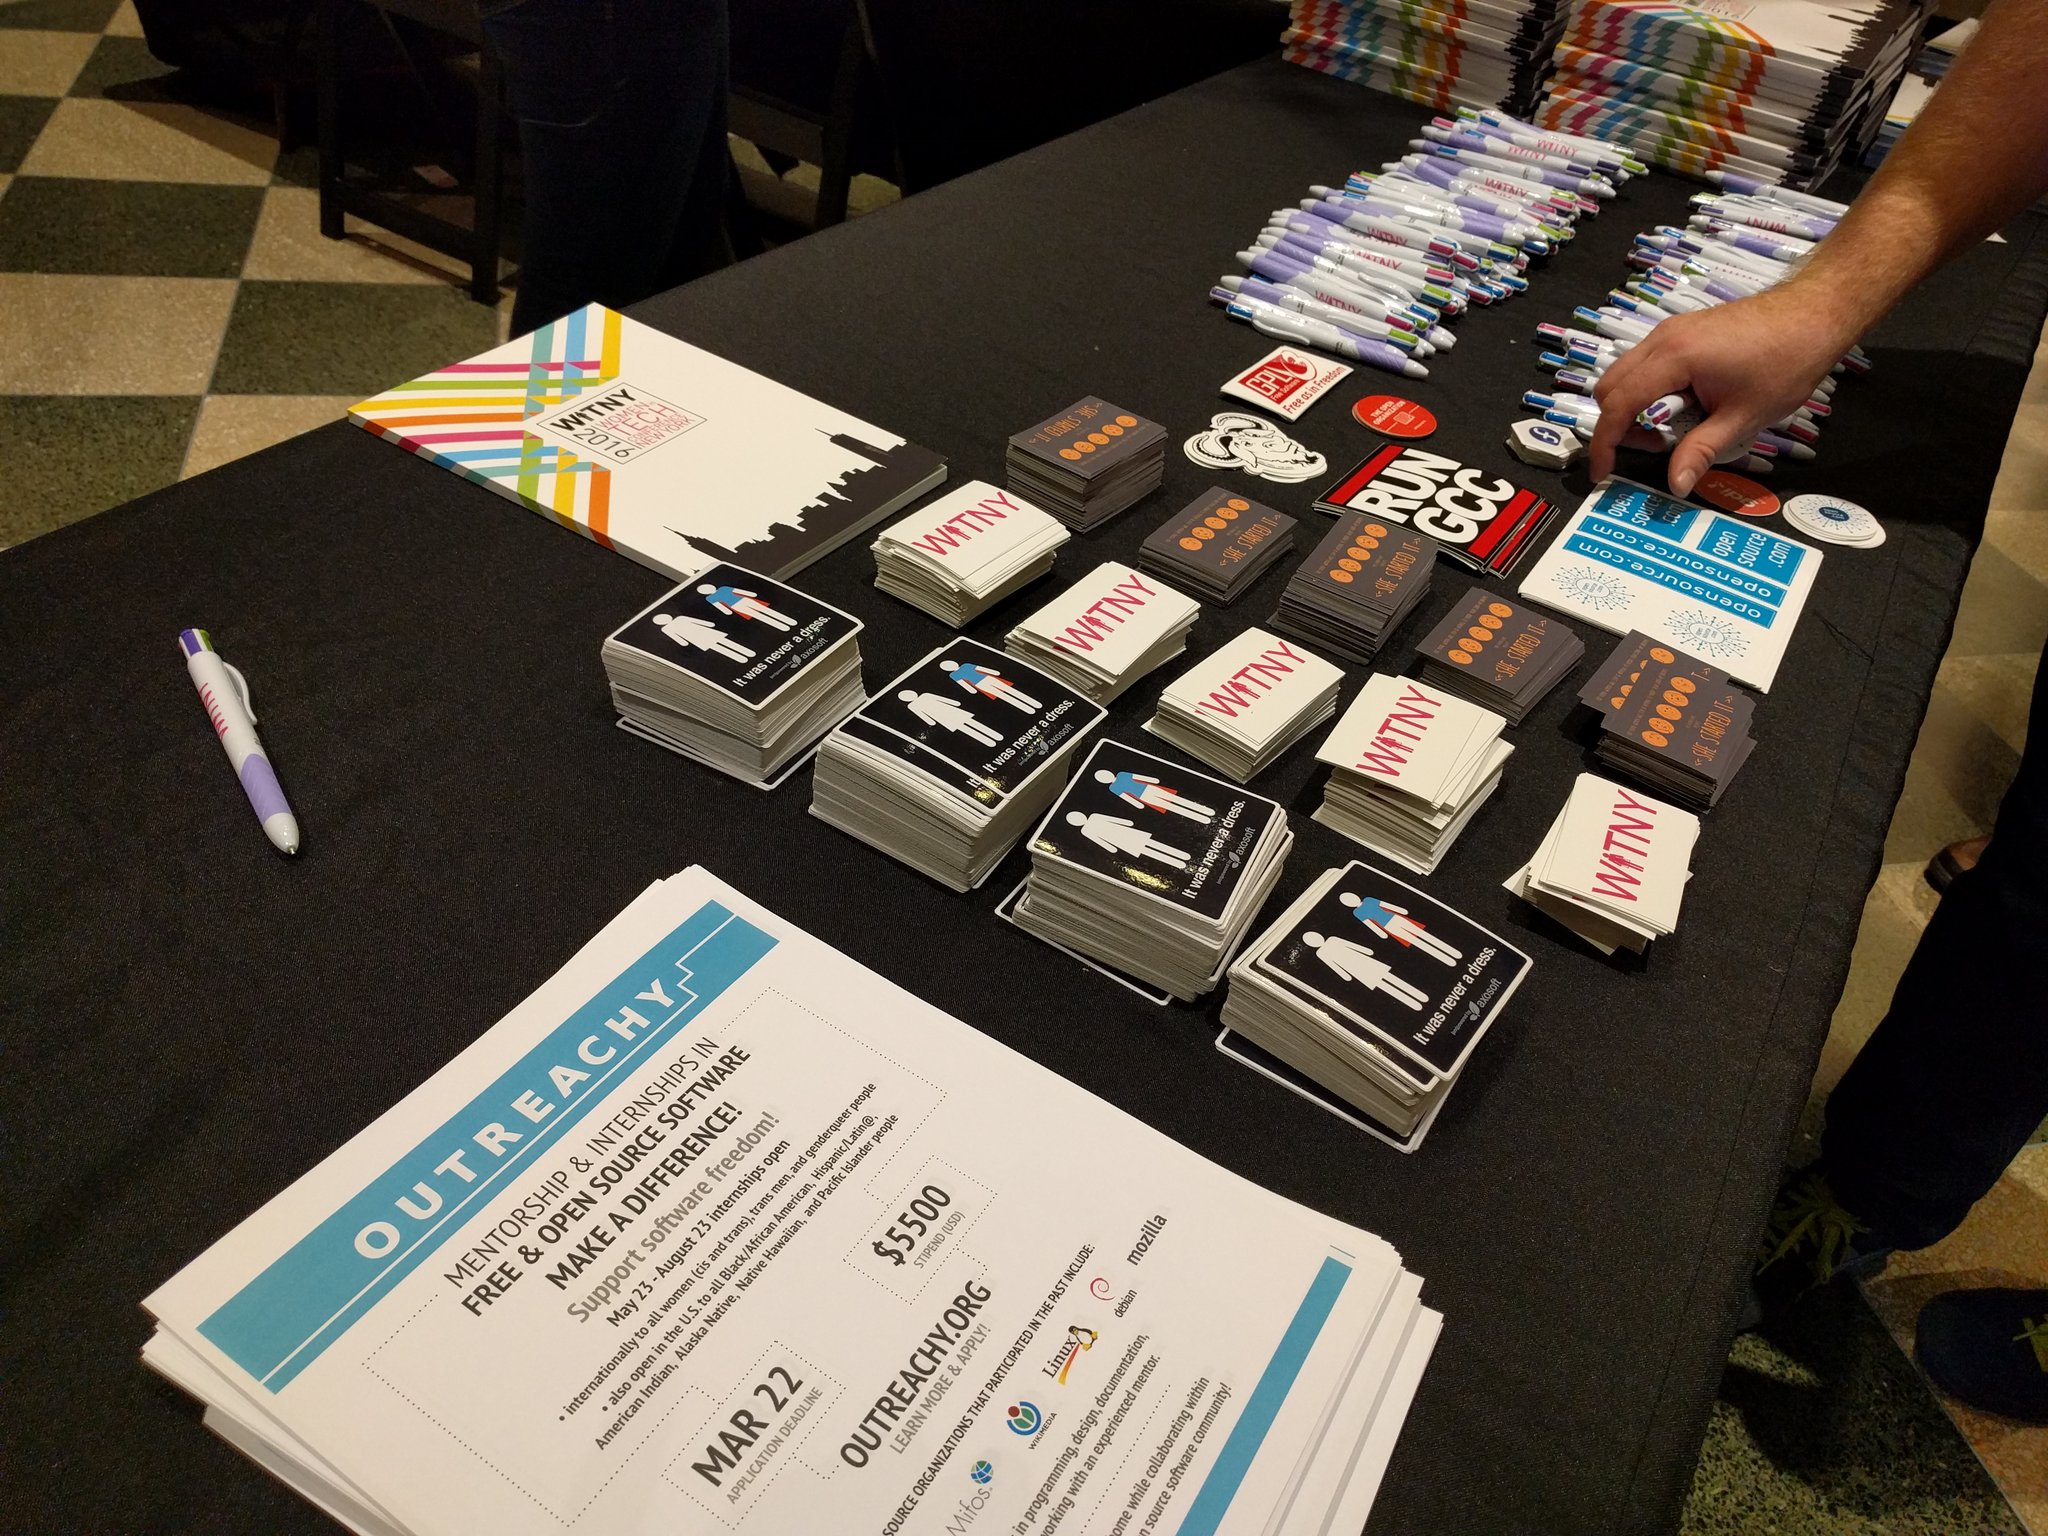 WiTNY: Stickers, brochures, and more swag!